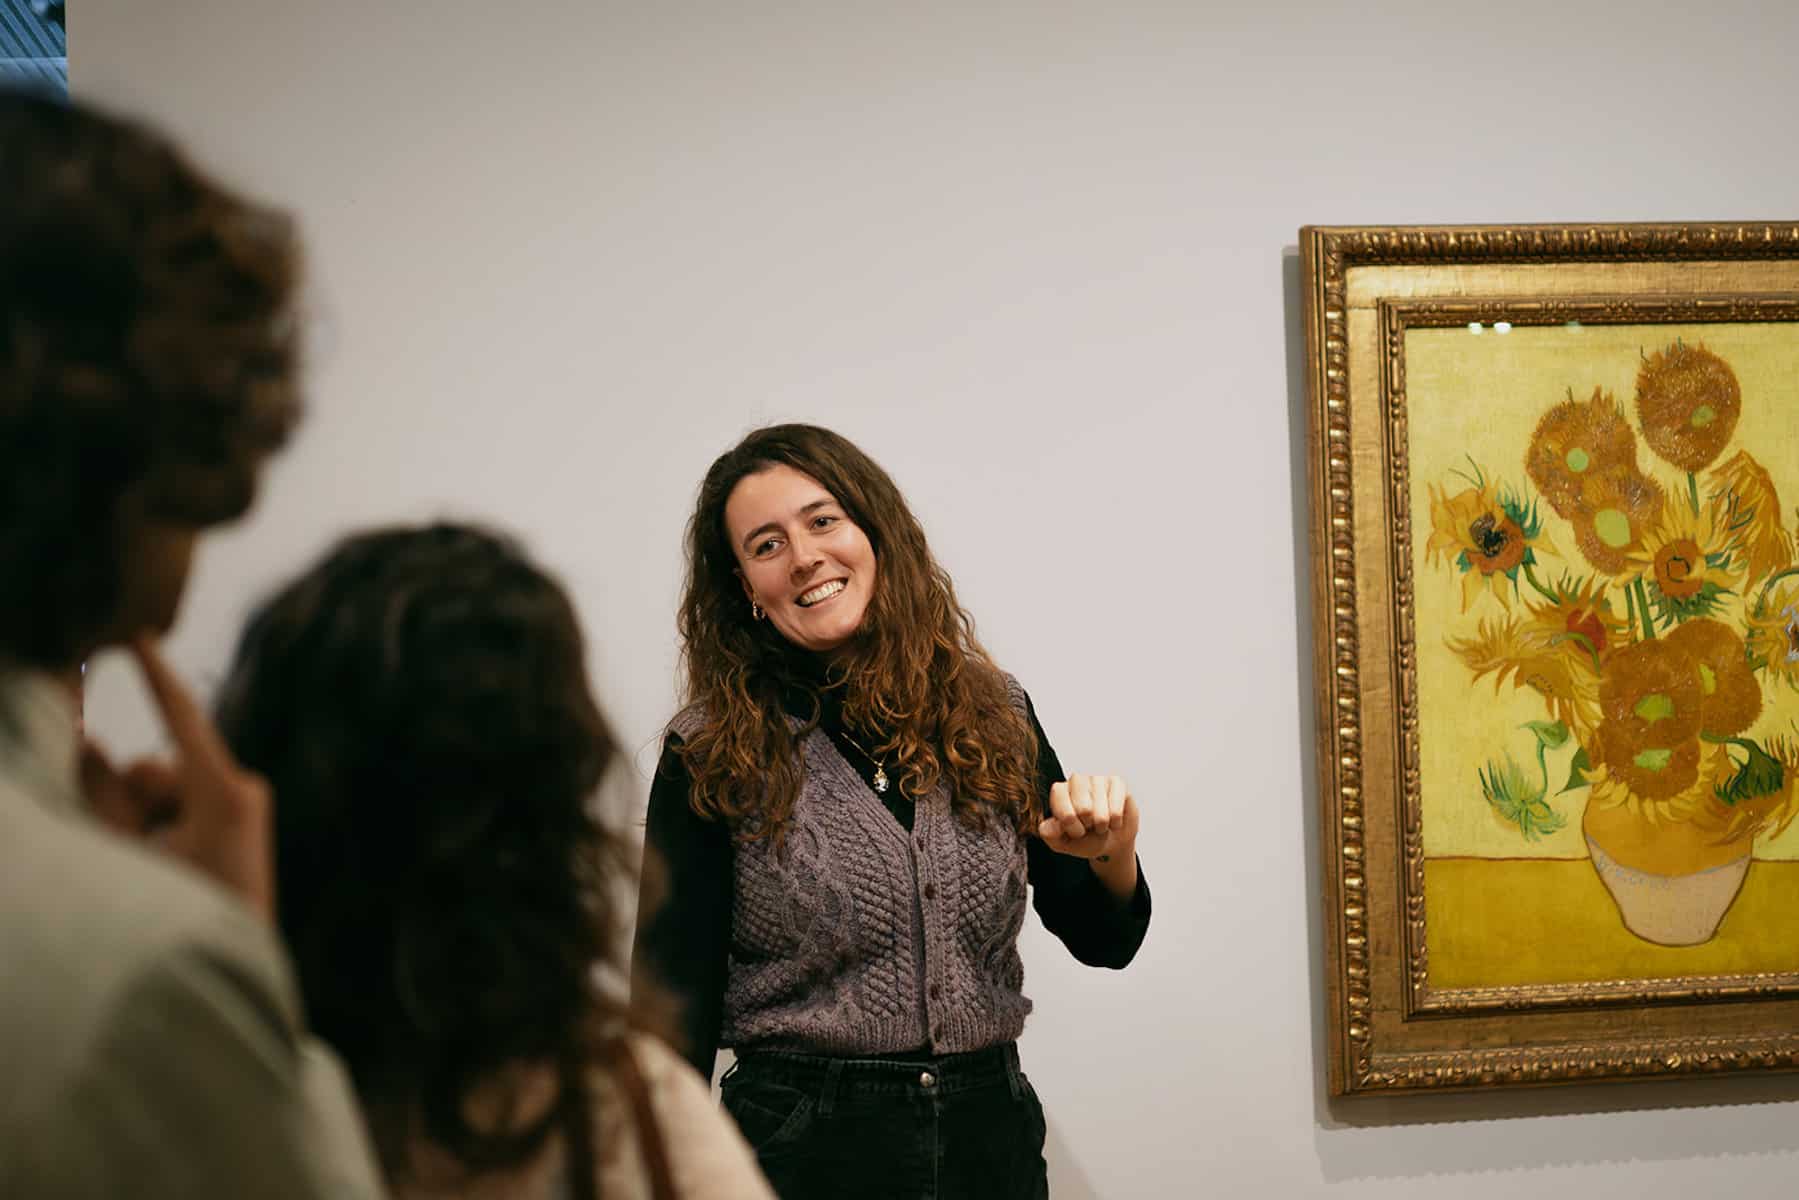 Woman discussing Van Gogh's Sunflowers in gallery.